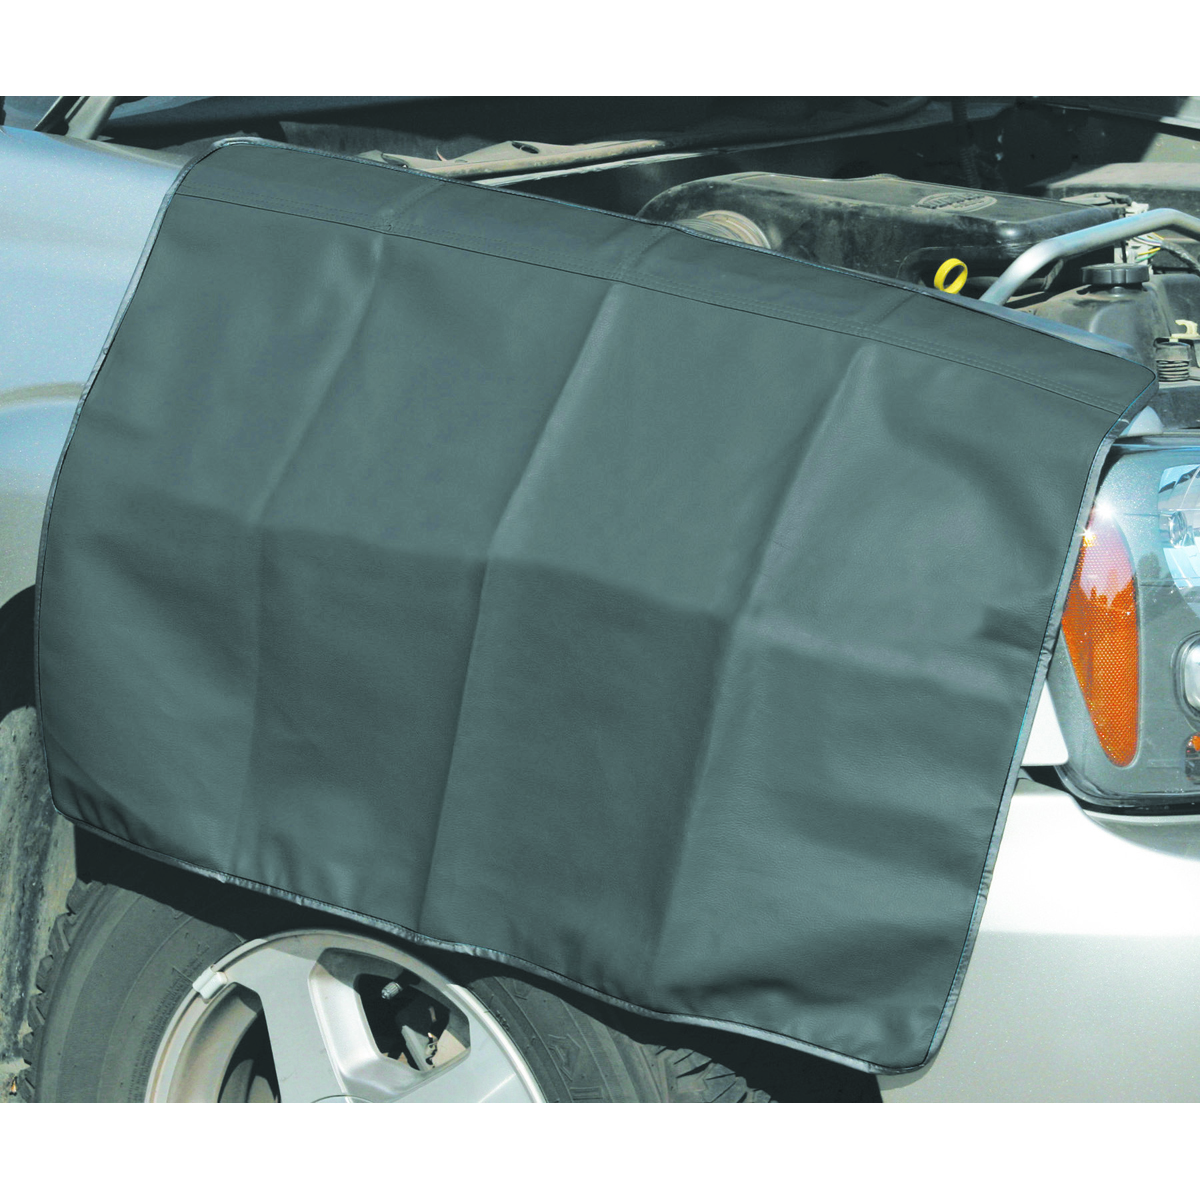 PITTSBURGH AUTOMOTIVE Fender Cover Work Mat - Item 96177